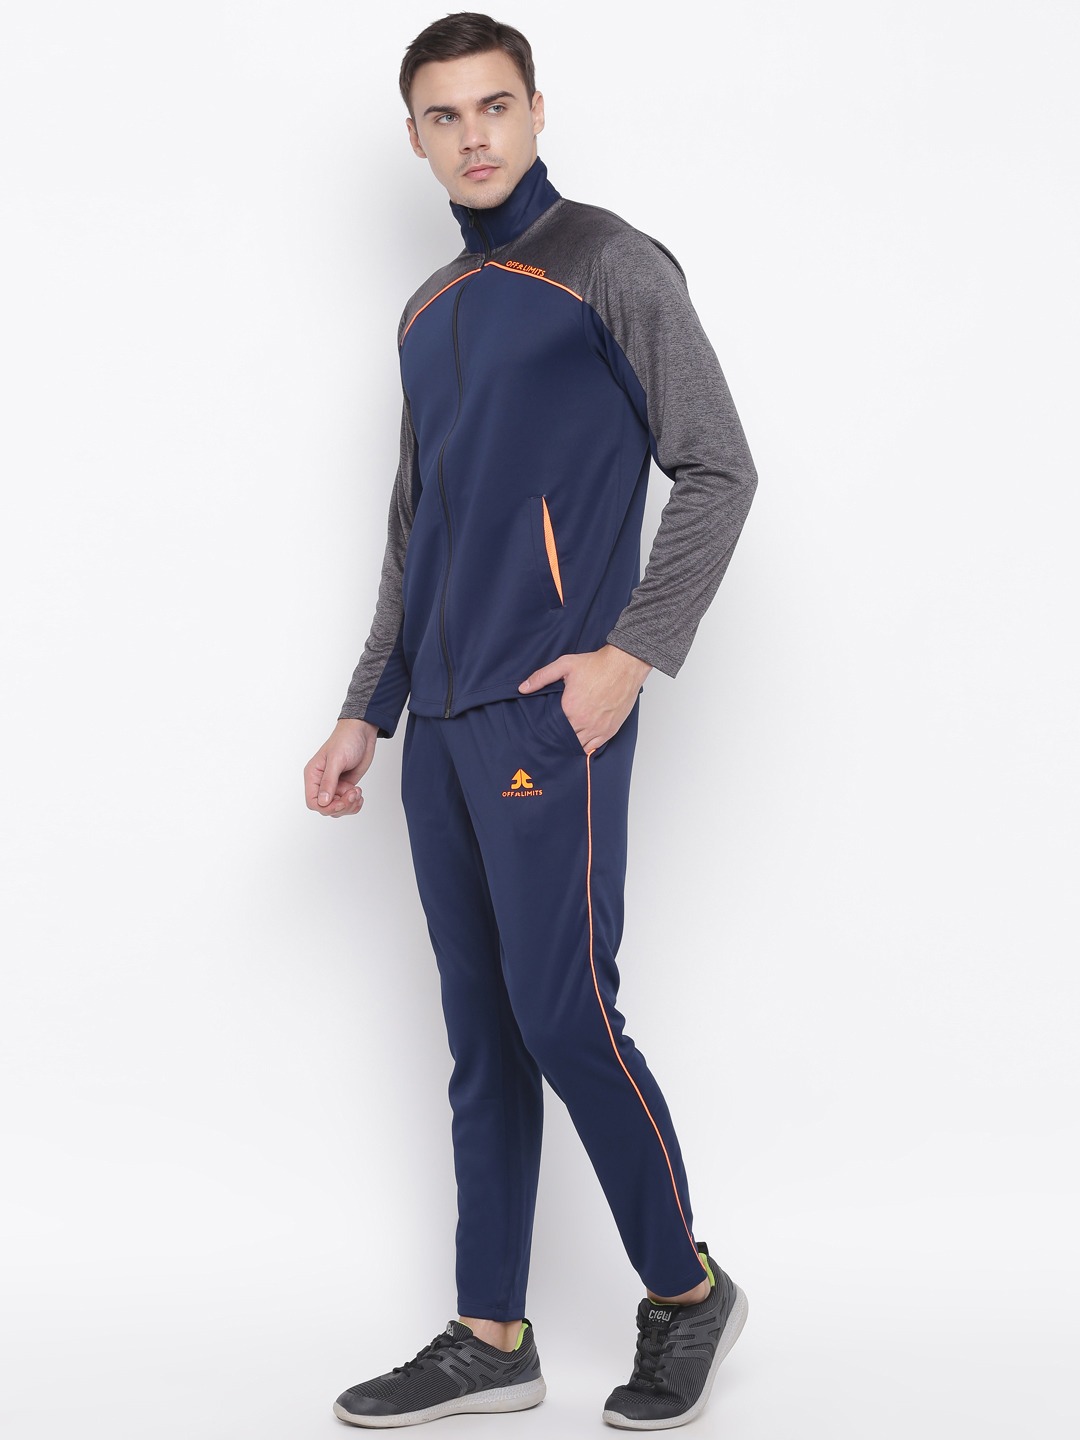 Clothing Tracksuits | OFF LIMITS Men Navy Blue & Charcoal Grey Colourblocked Tracksuit - PZ69005